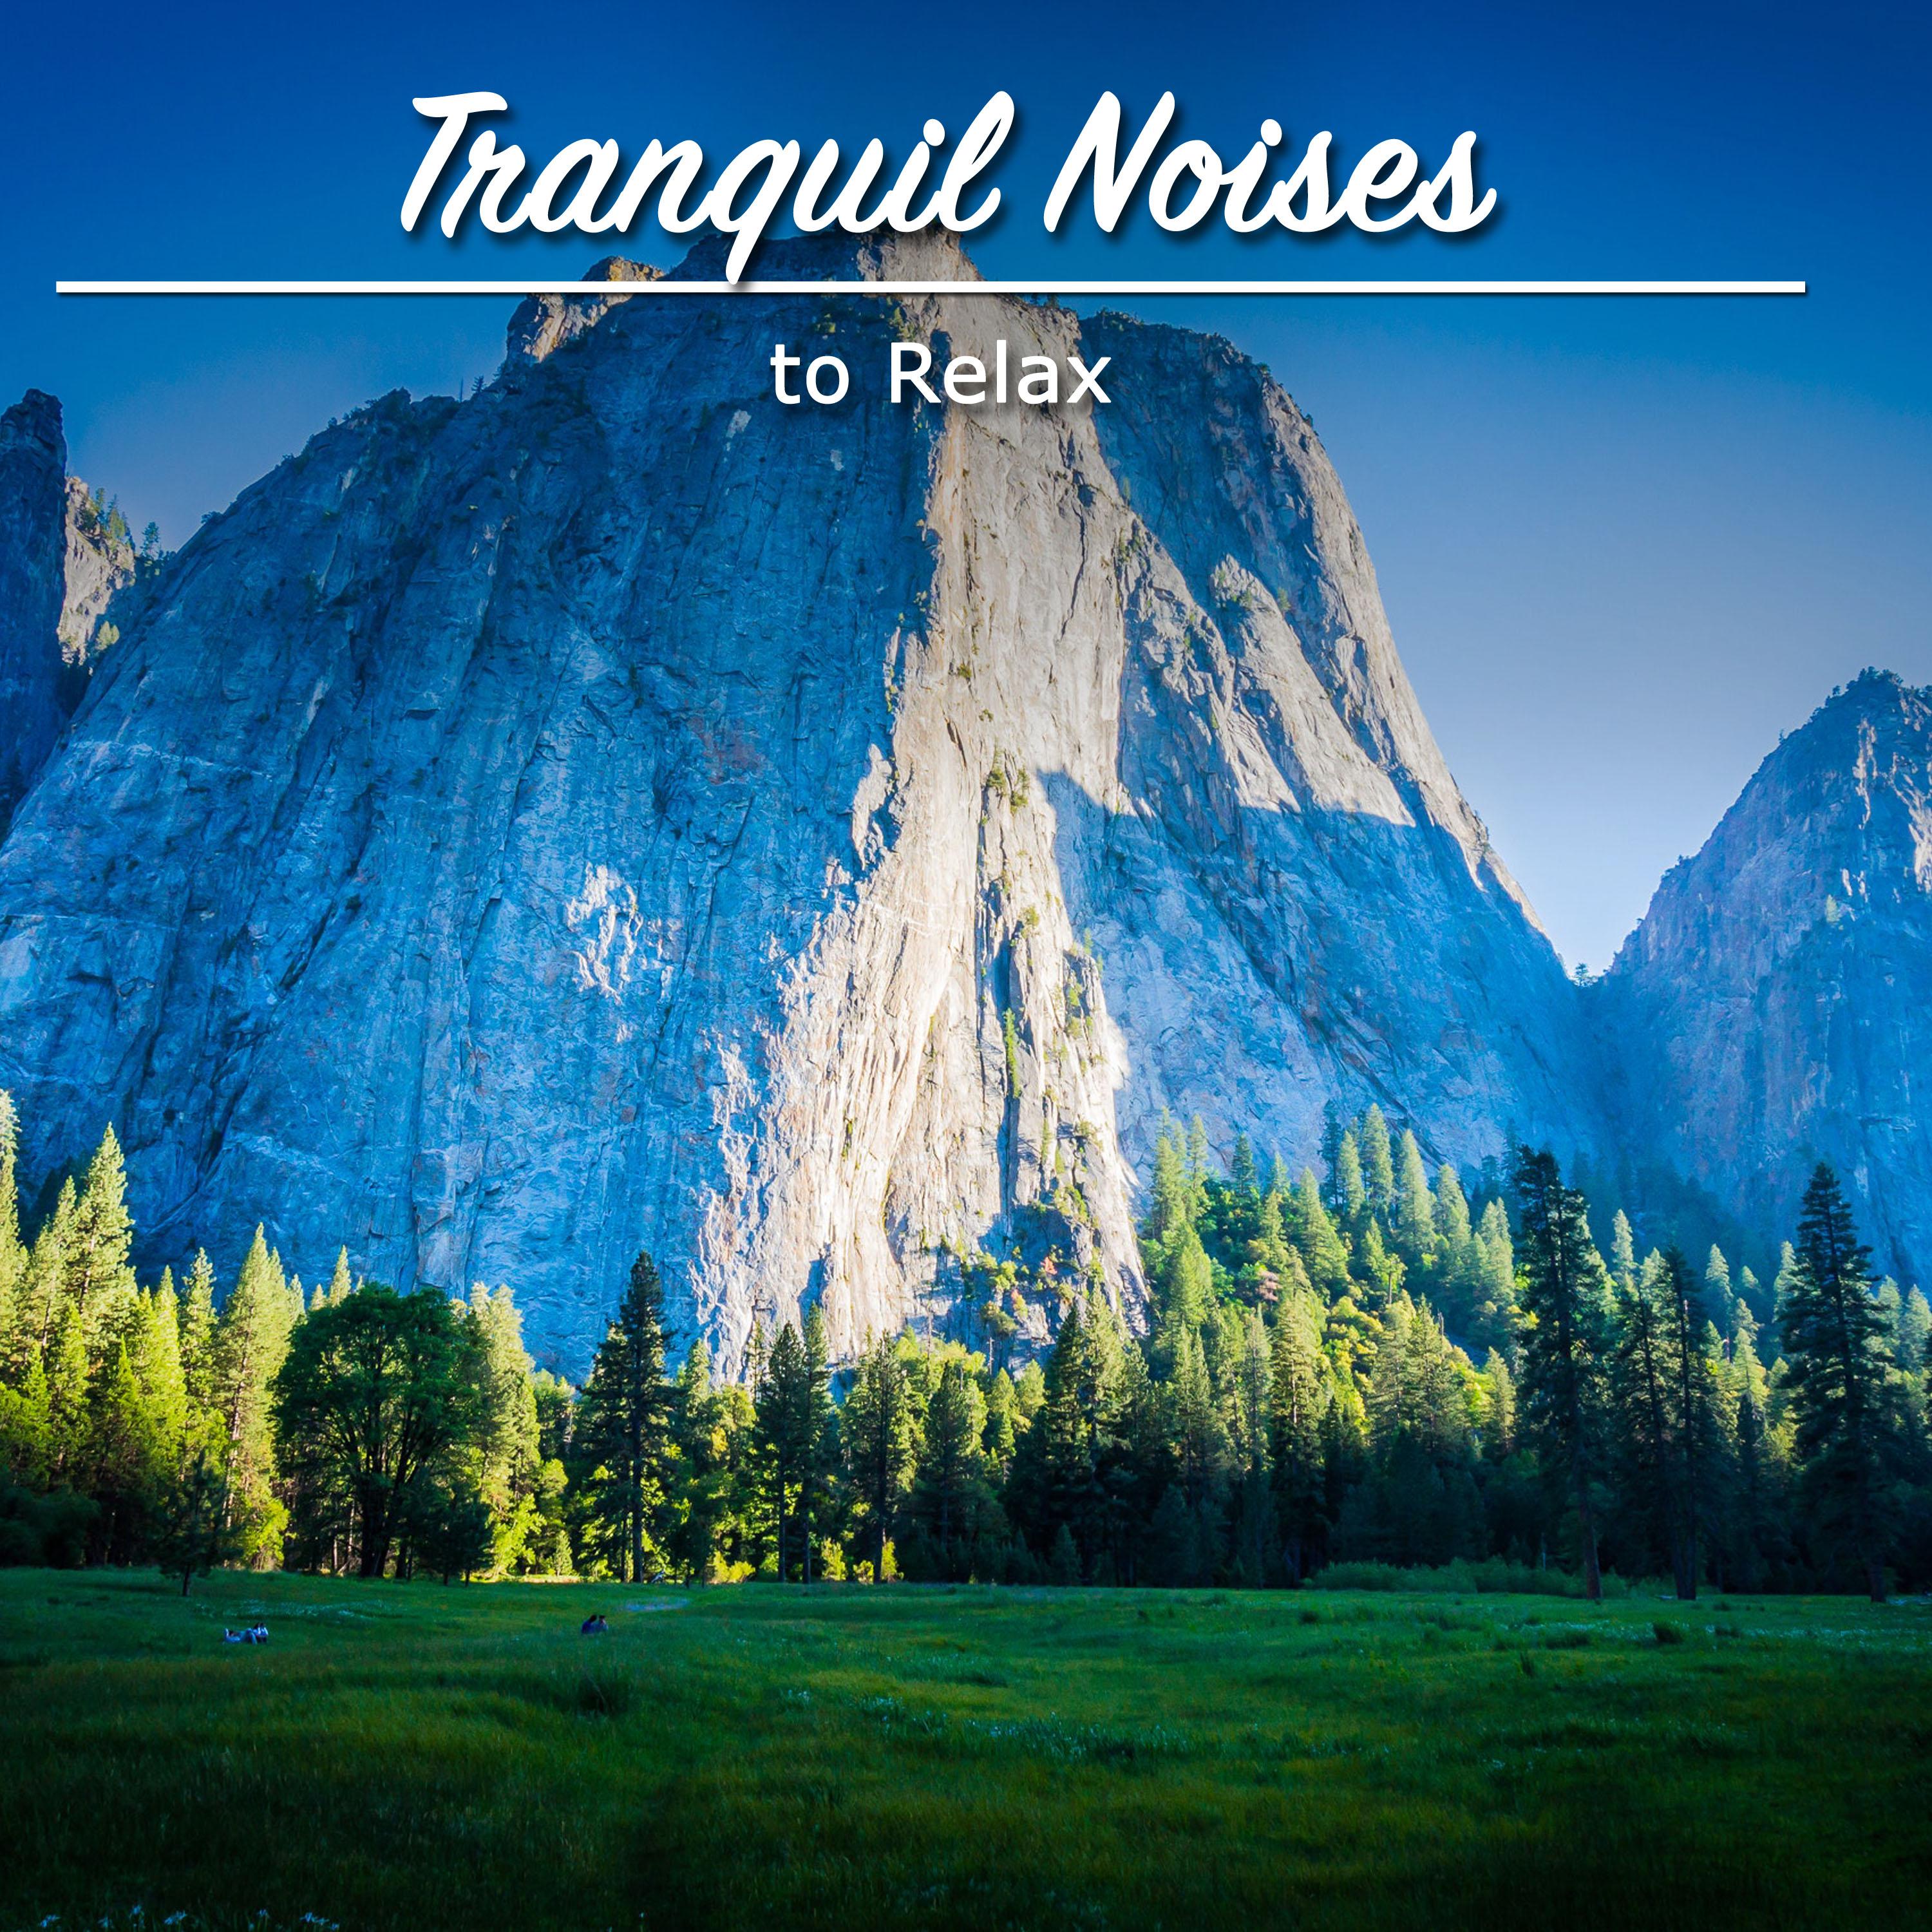 15 Tranquil Noises to Relax